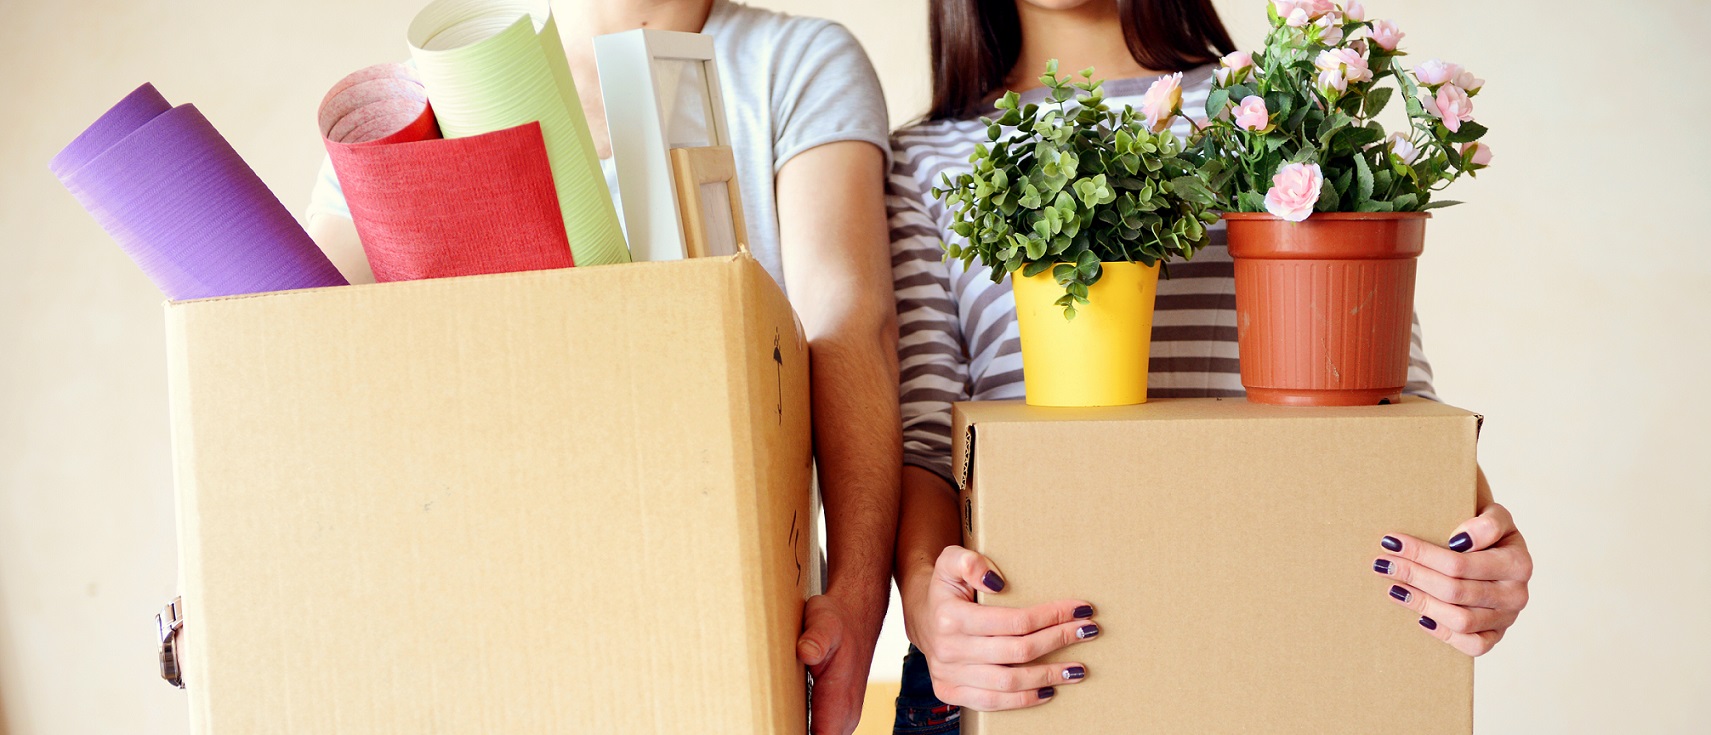 Couple holding moving boxes